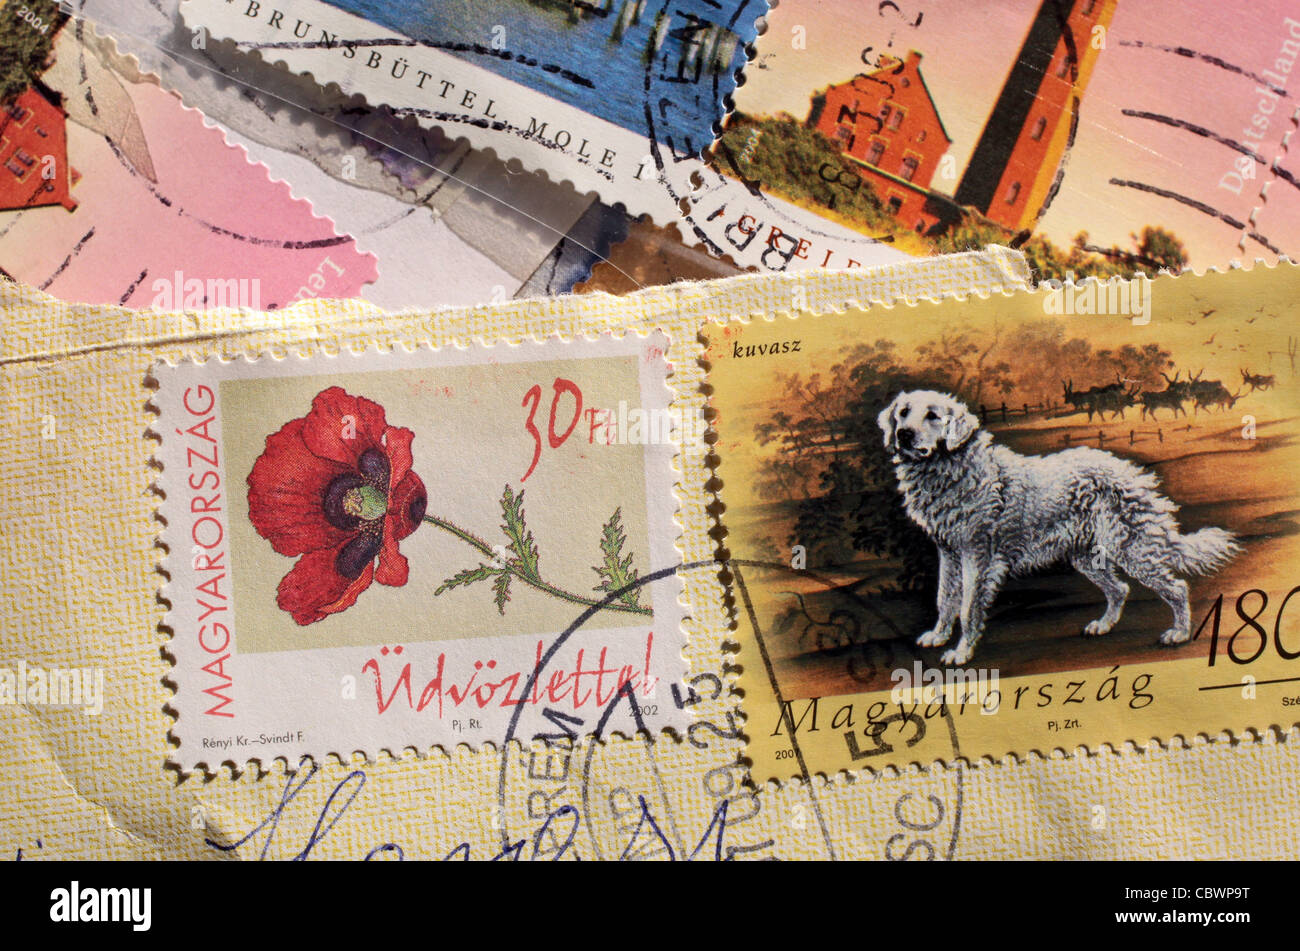 Postage stamps from Hungary varied and colorful Stock Photo